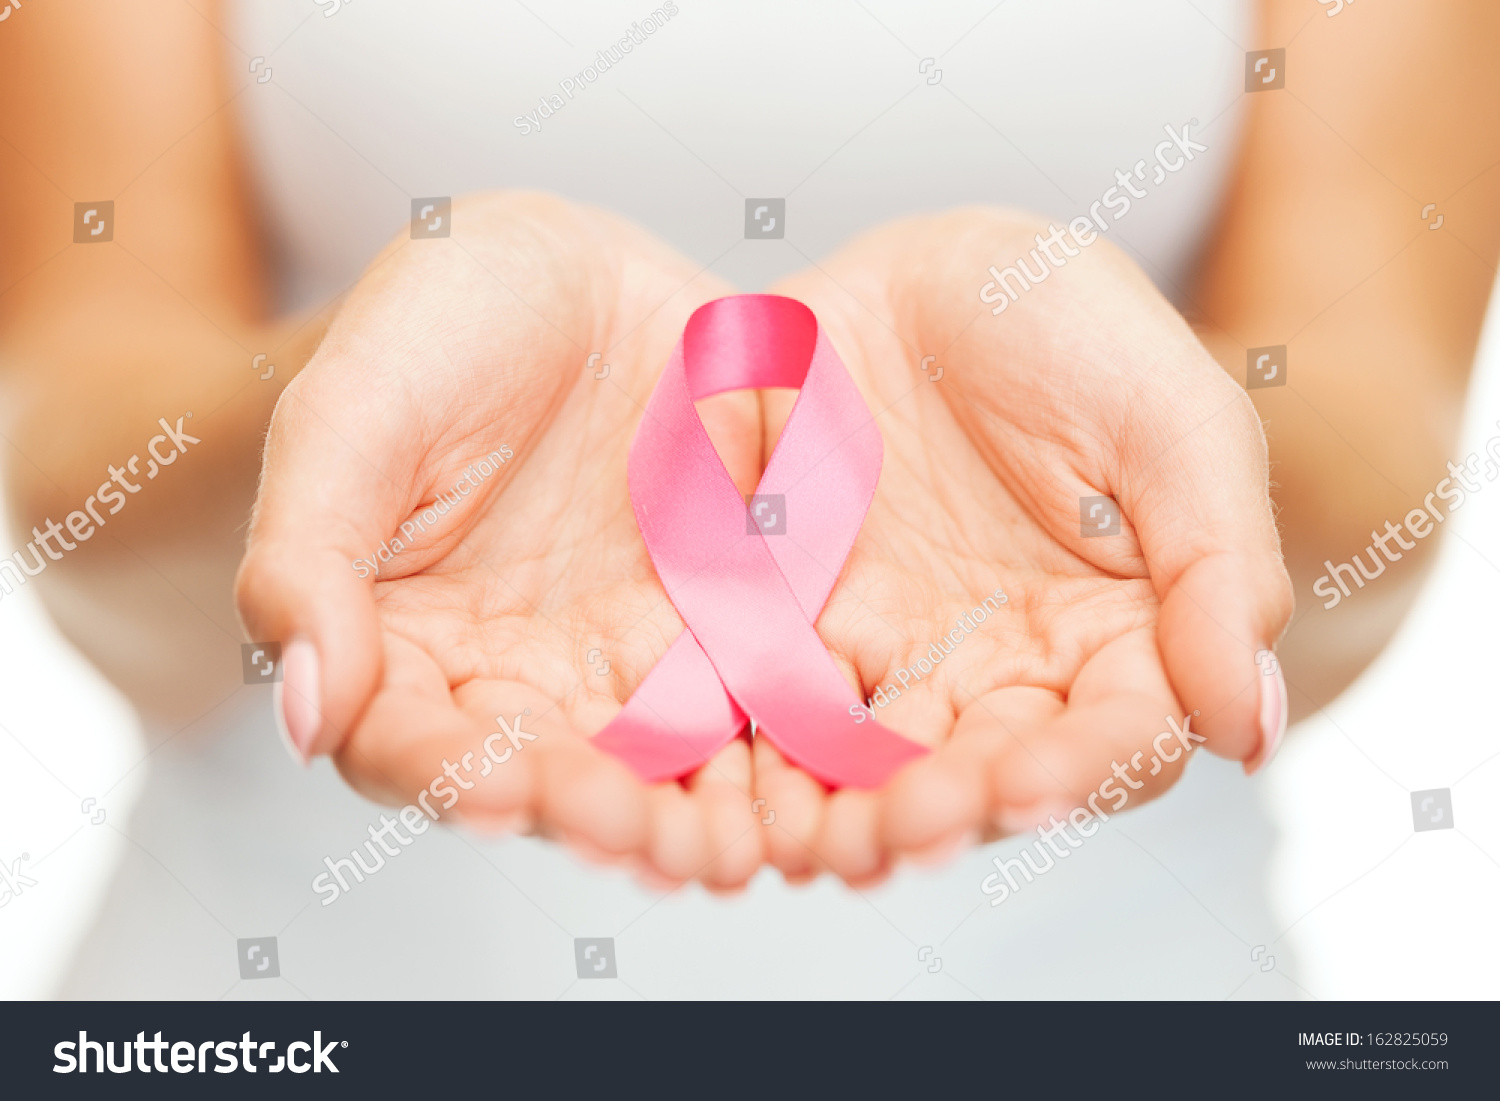 healthcare and medicine concept - womans hands holding pink breast cancer awareness ribbon #162825059